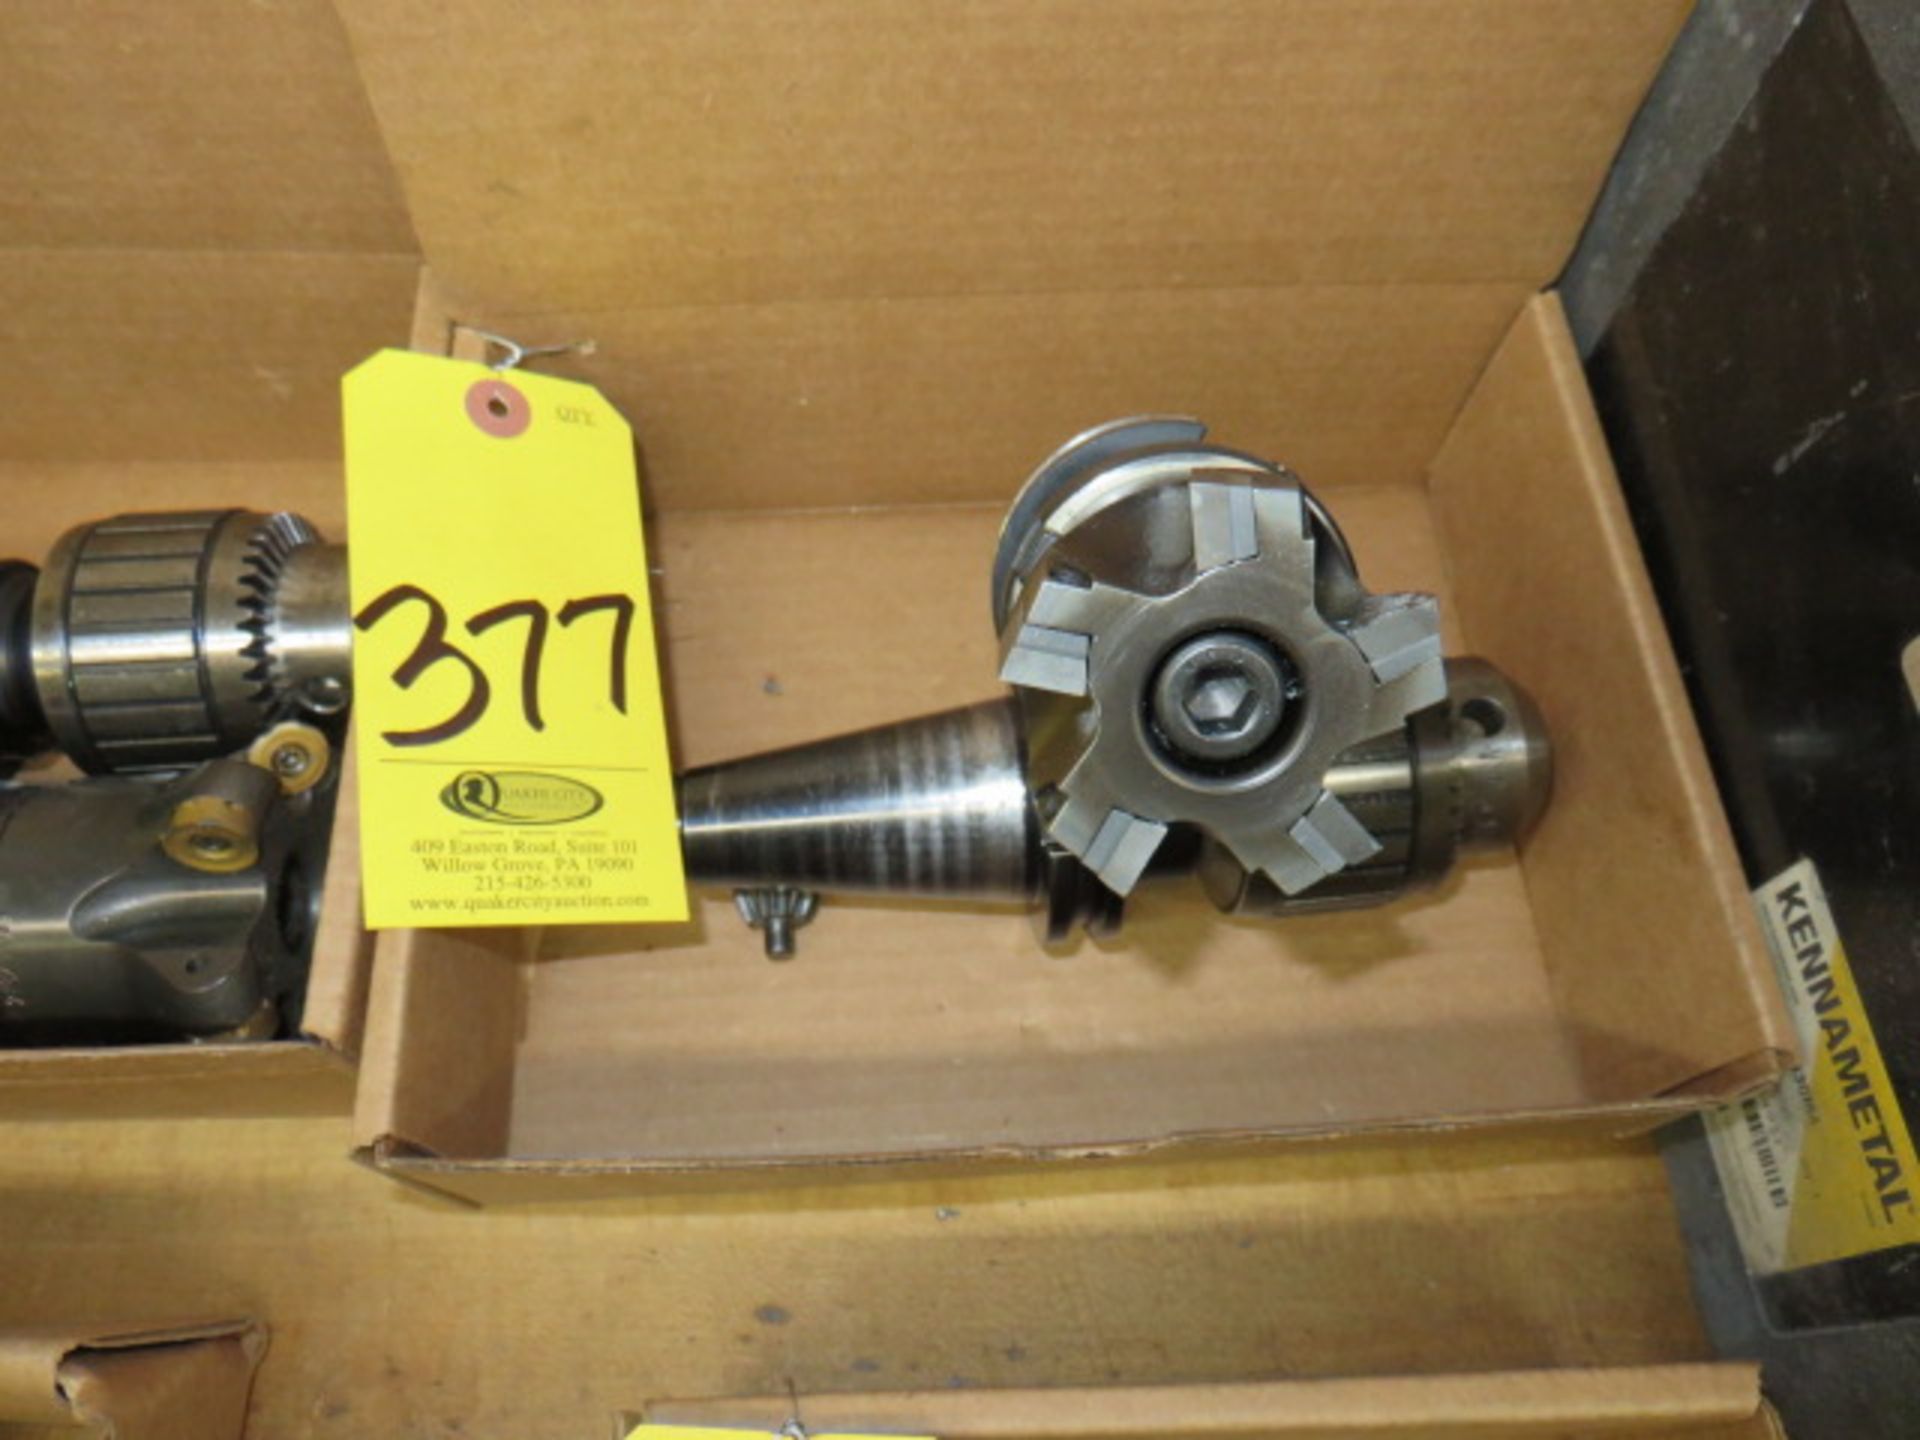 (2) CAT 40 HOLDERS EQUIPPED WITH FACEMILL AND DRILL CHUCK - Image 2 of 2